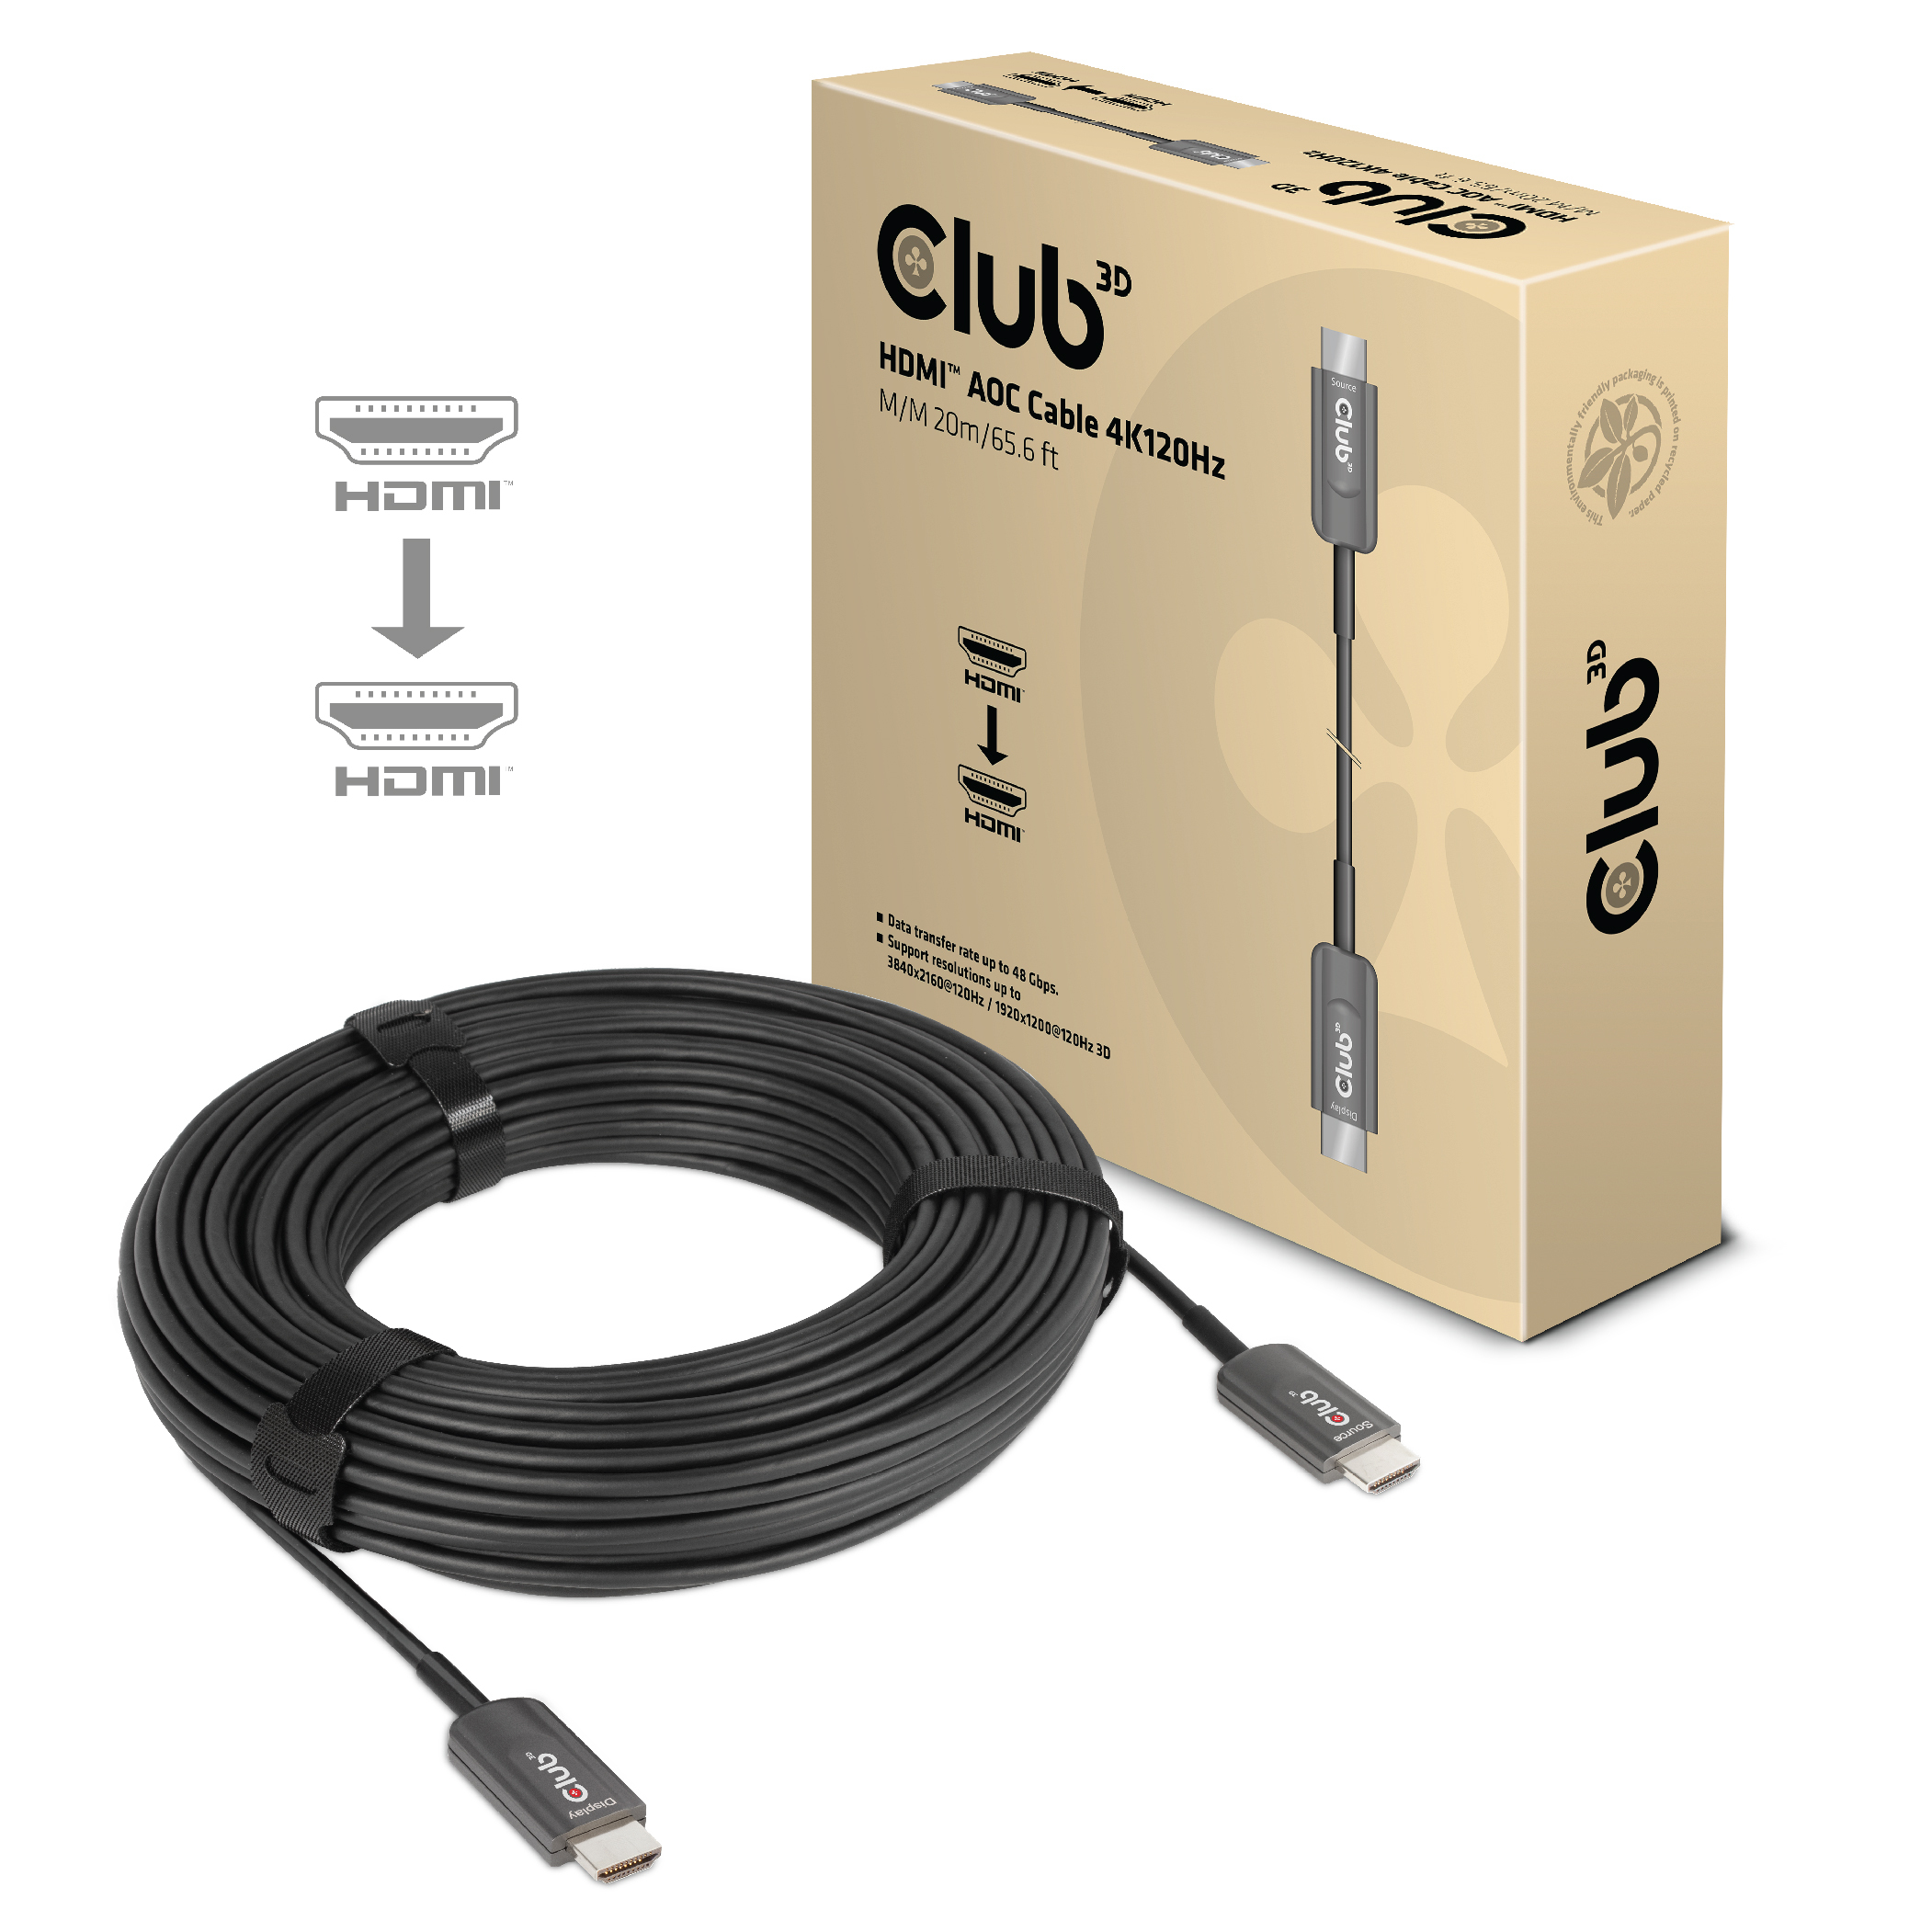 Club 3D Ultra High Speed HDMI™ Certified AOC Cable 4K120Hz/8K60Hz Unidirectional M/M 20m/65.6ft